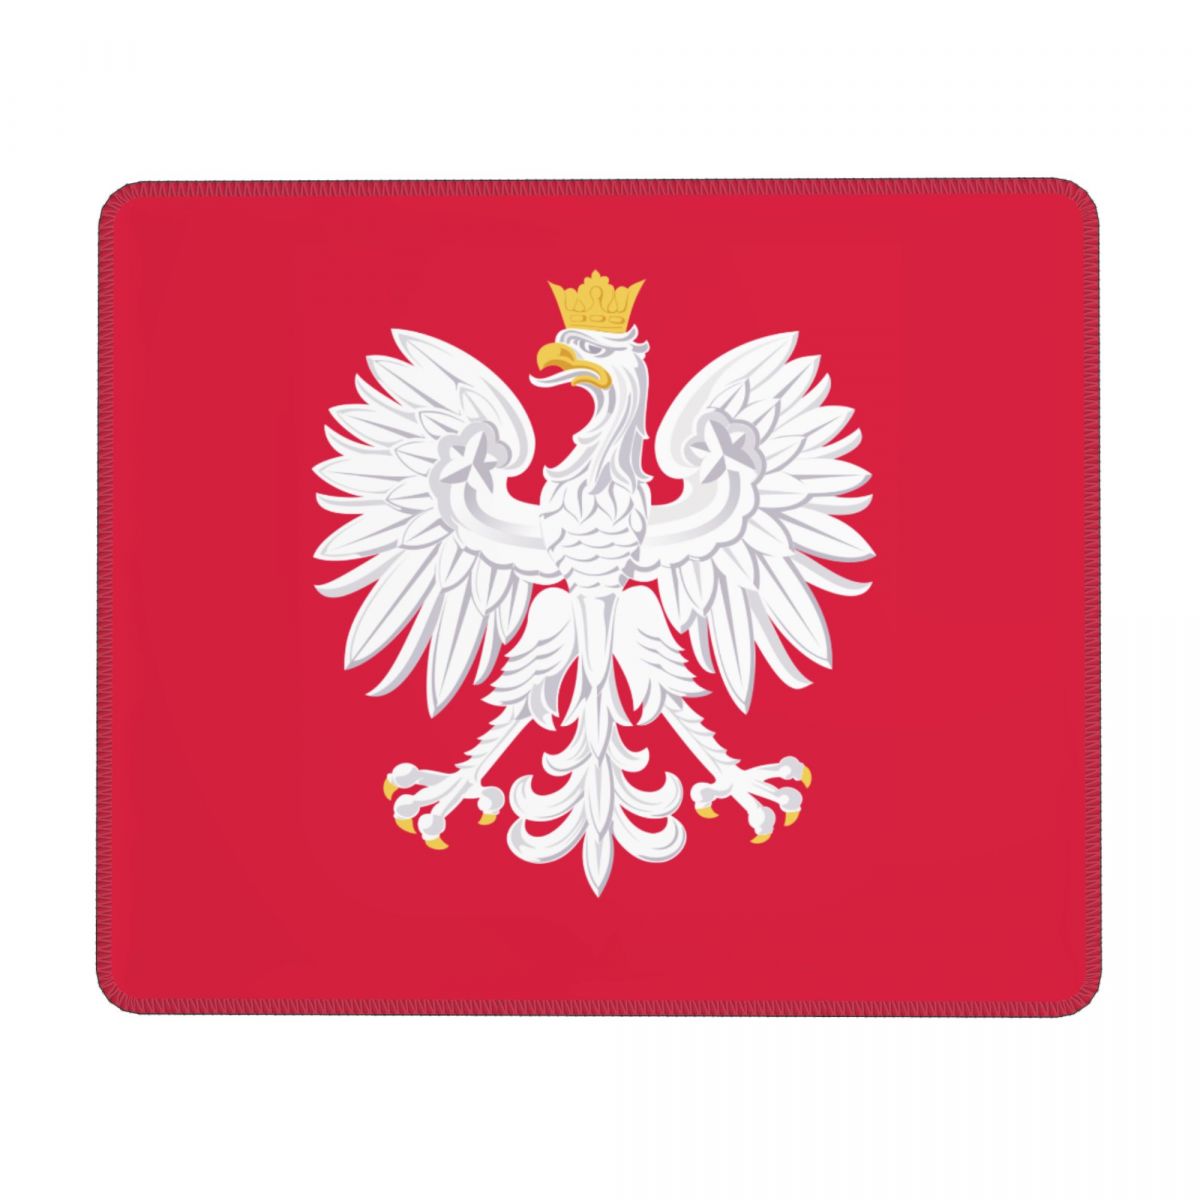 Poland National Football Team Square Gaming Mouse Pad with Stitched Edge